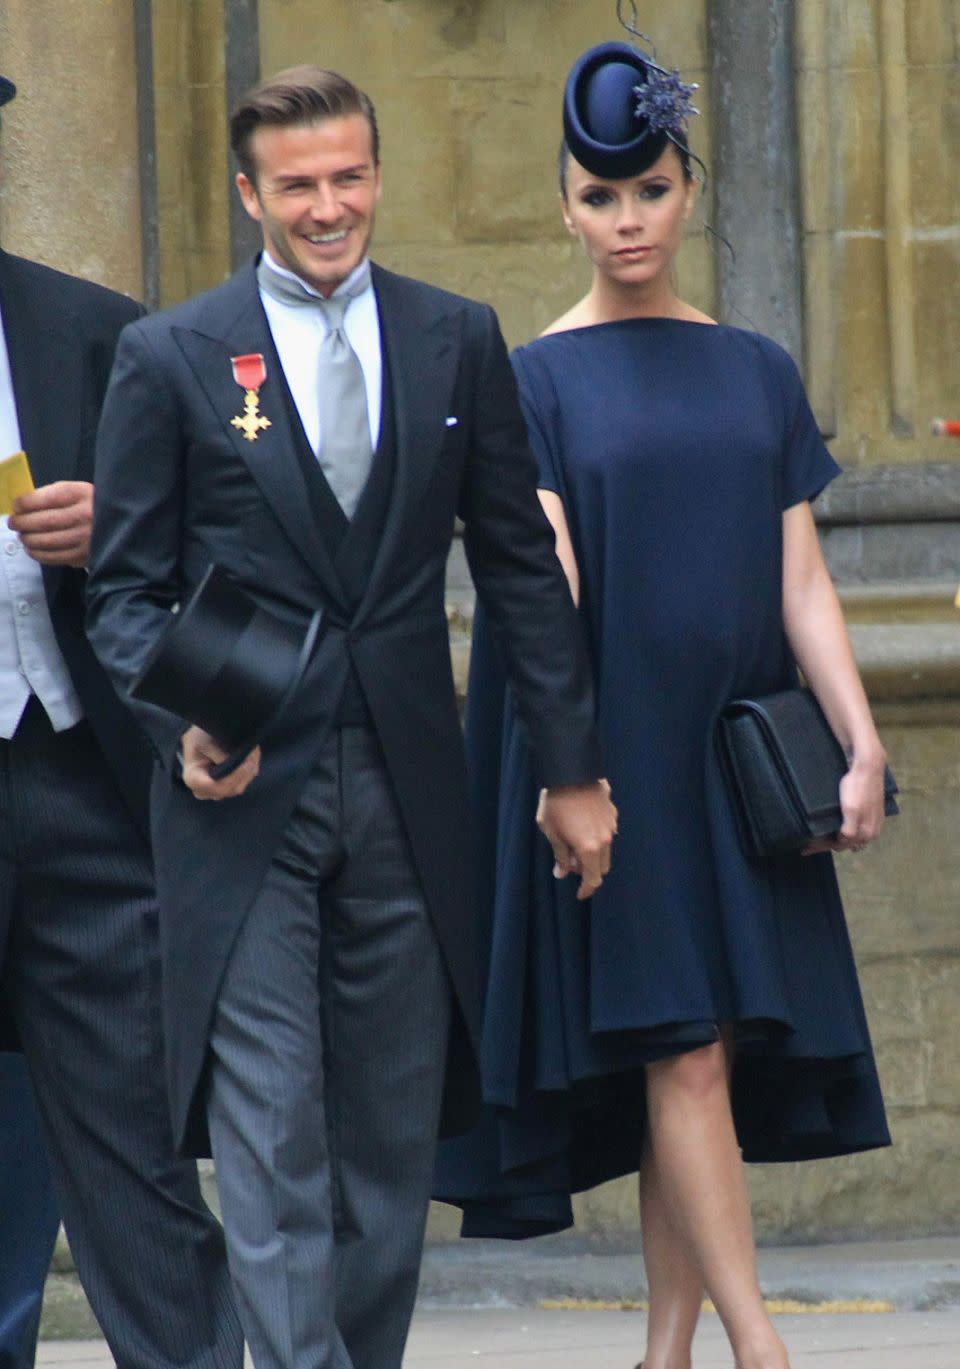 The Beckhams have been on the Royal circuit for quite a few years. They attended Prince William and Kate Middleton's nuptials back in 2011. Source: Getty